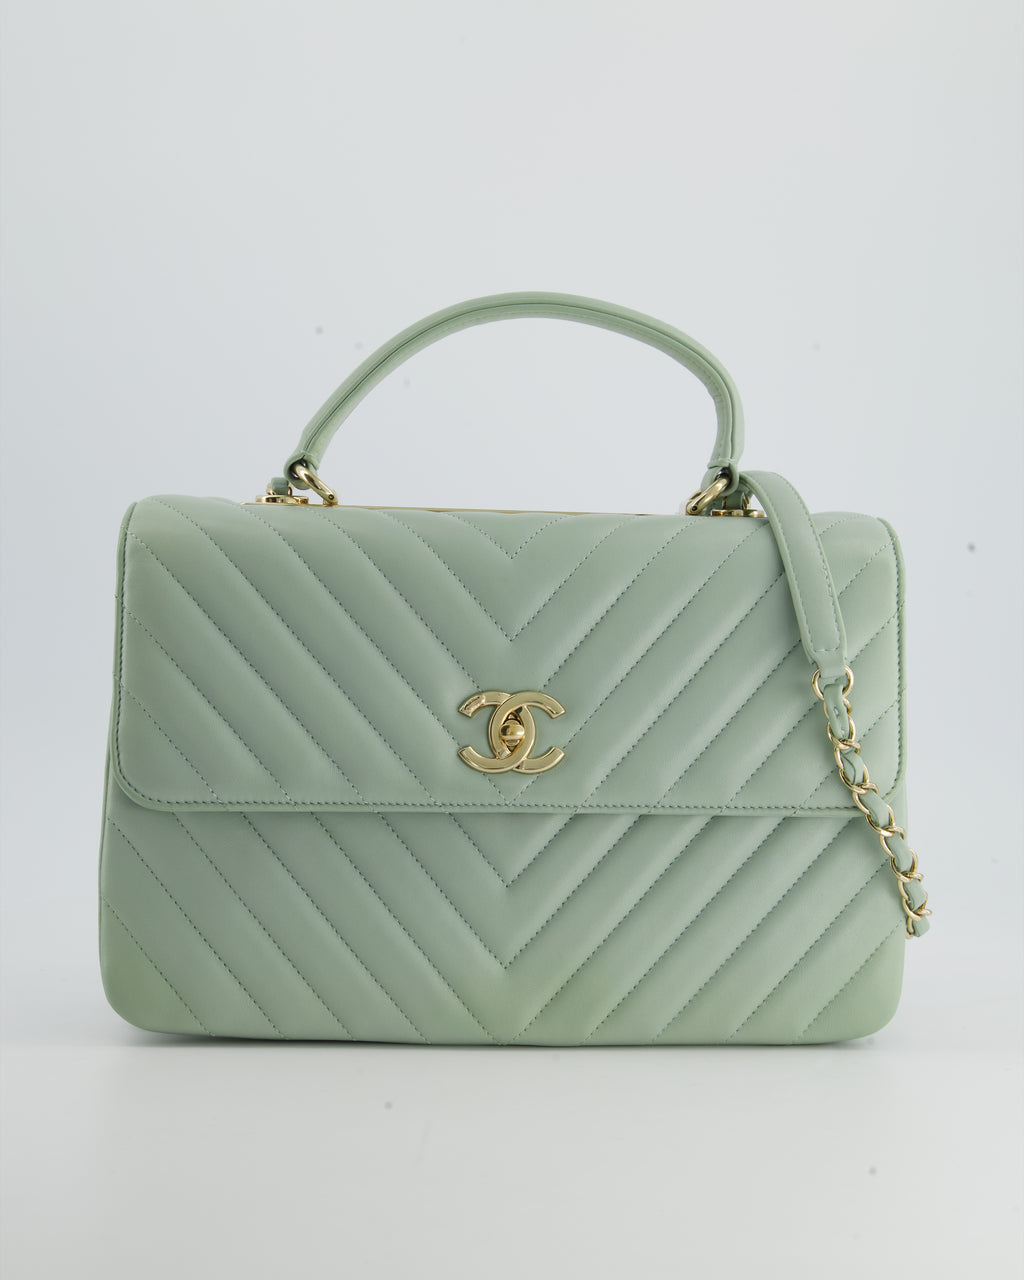 Chanel Pastel Green Trendy CC Flap Bag in Chevron Lambskin with